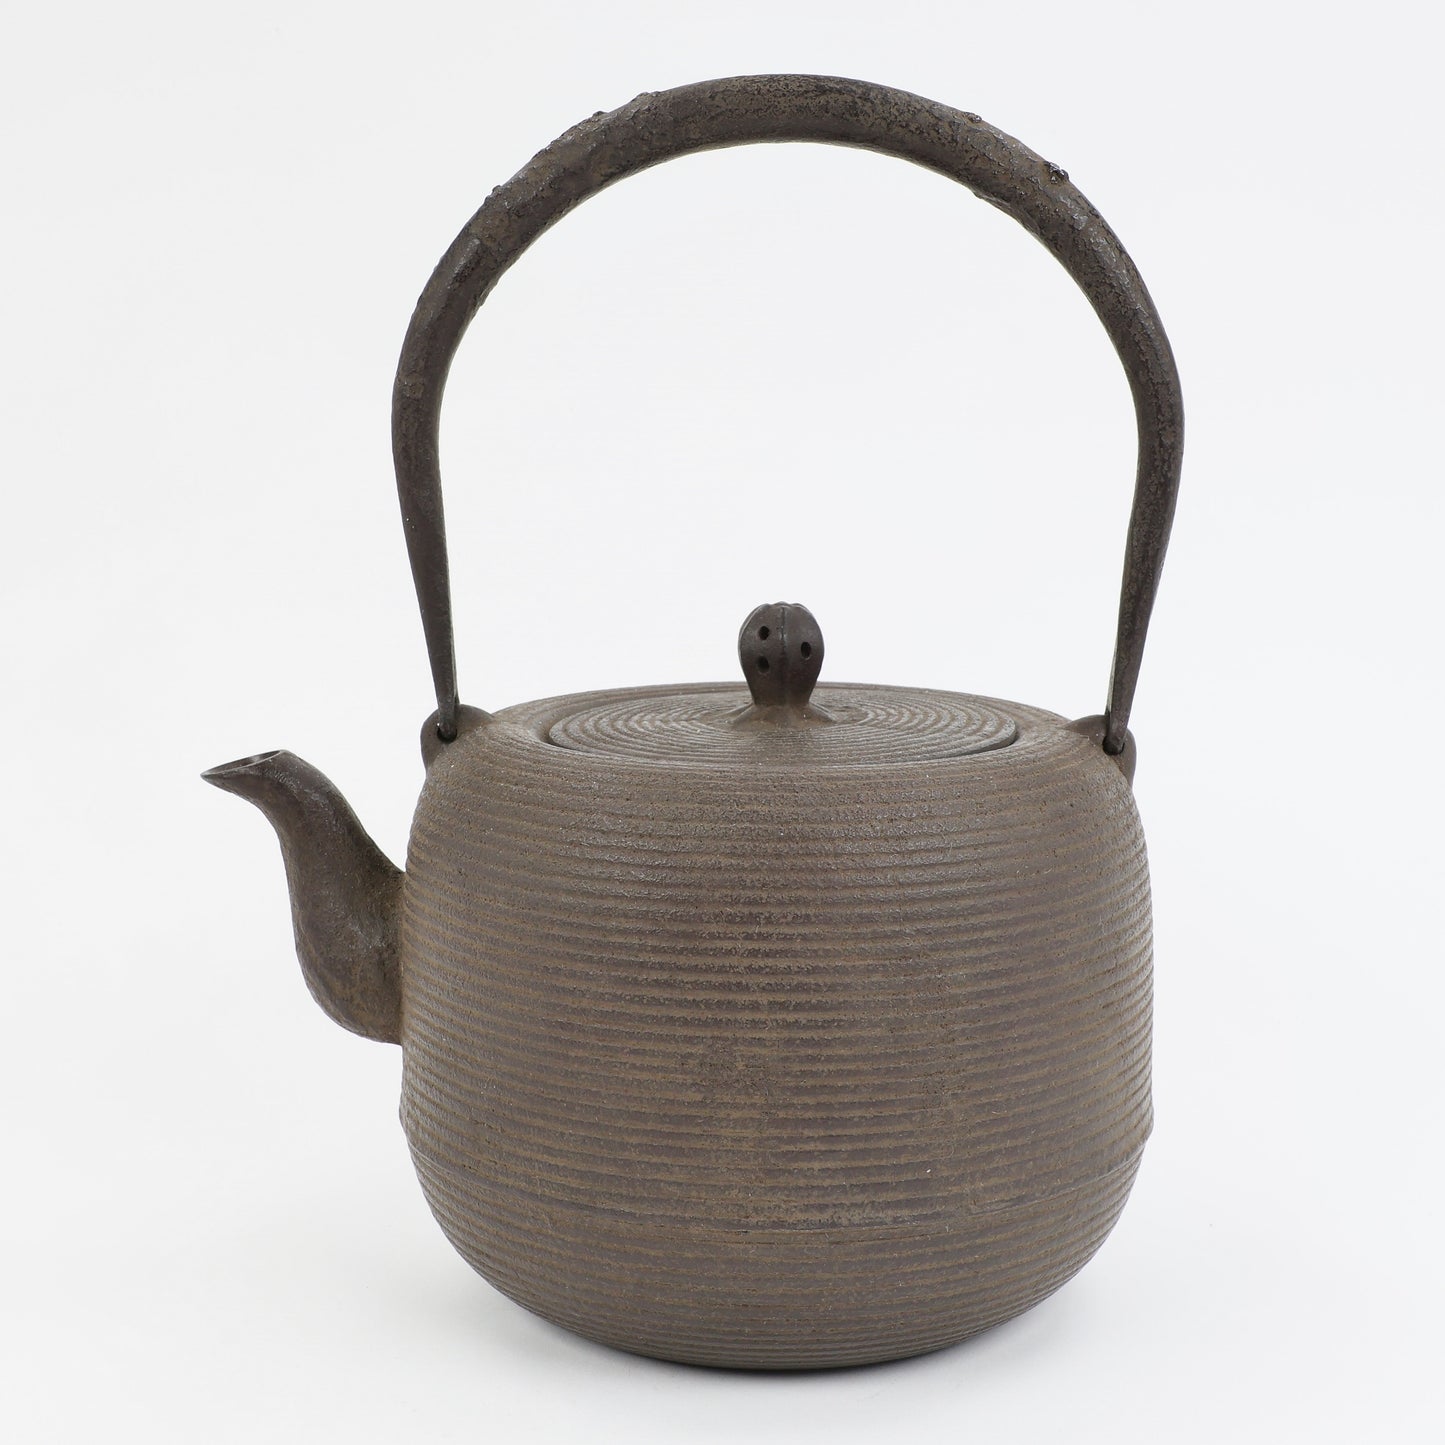 Tetsubin, Cast iron kettle, Japanese handmade tetsubin, Tetsubin teapot, Tetsubin kettle, Cast iron teapot from Japan, Cast iron teapot, Nambutekki, Natsume shape, 1.4L, Itome (string lines) pattern, Free Shipping